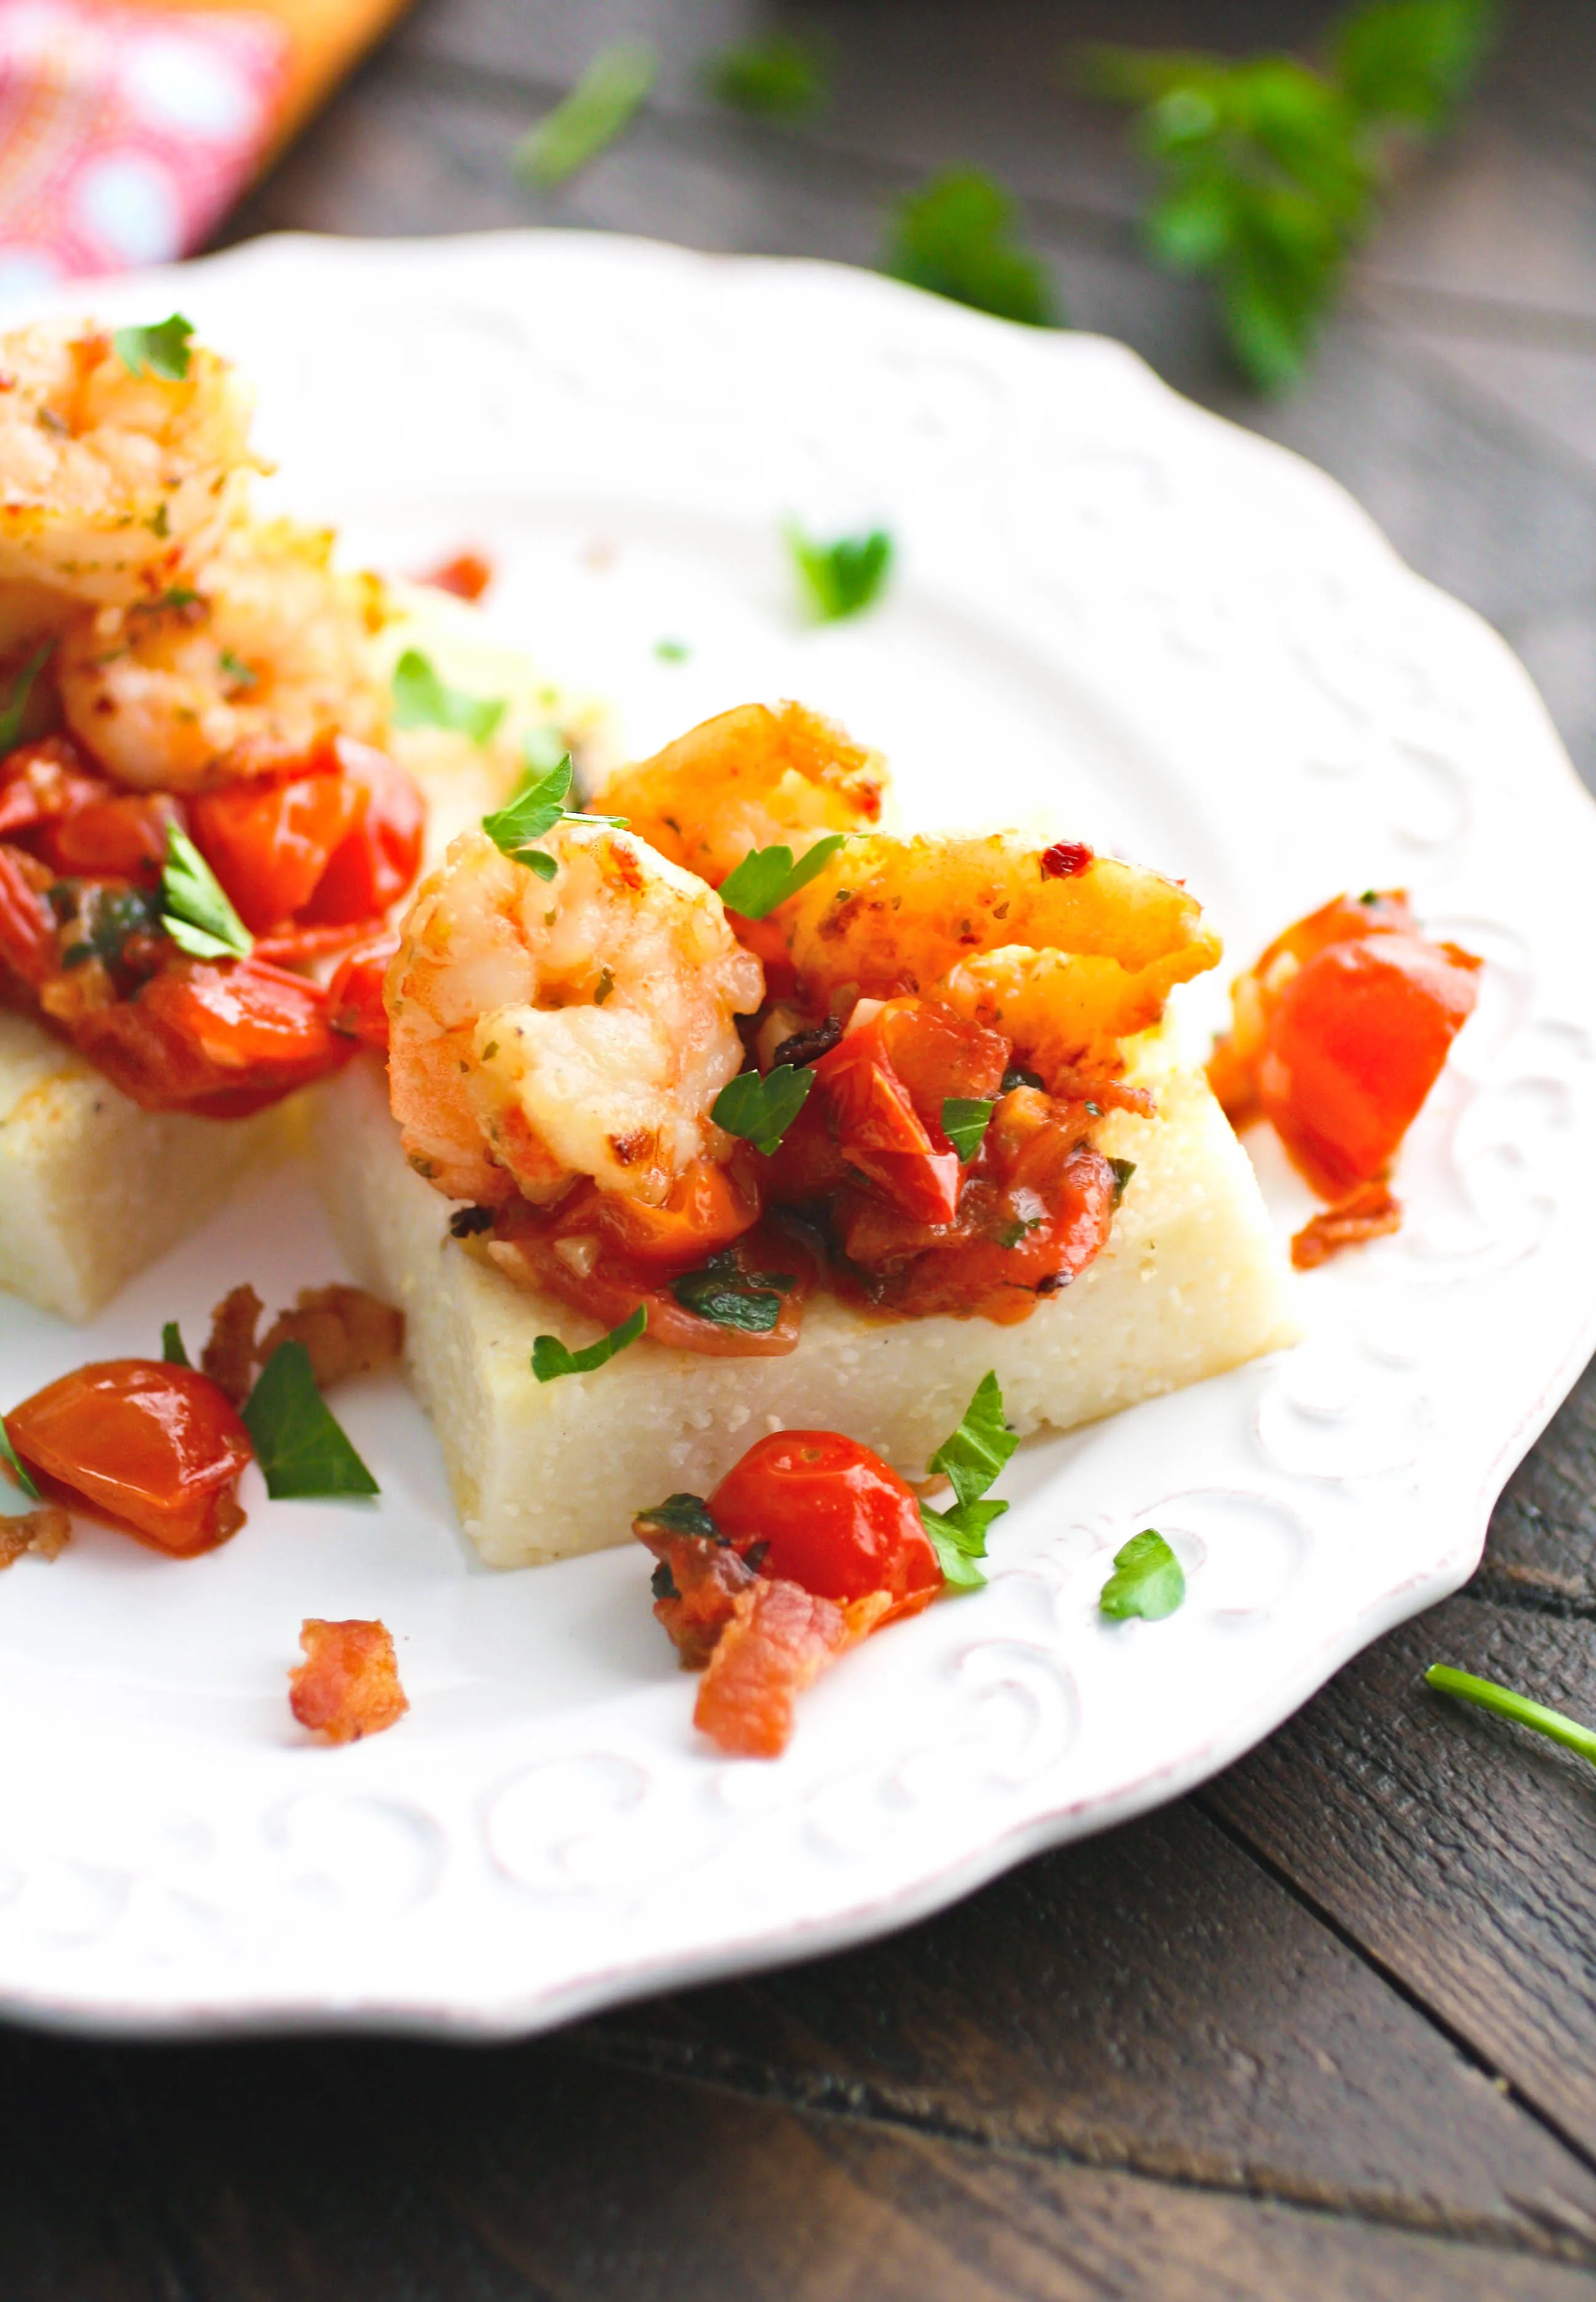 Enjoy a coastal favorite! These Individual Cheesy Shrimp & Grits are so tasty for a special meal!